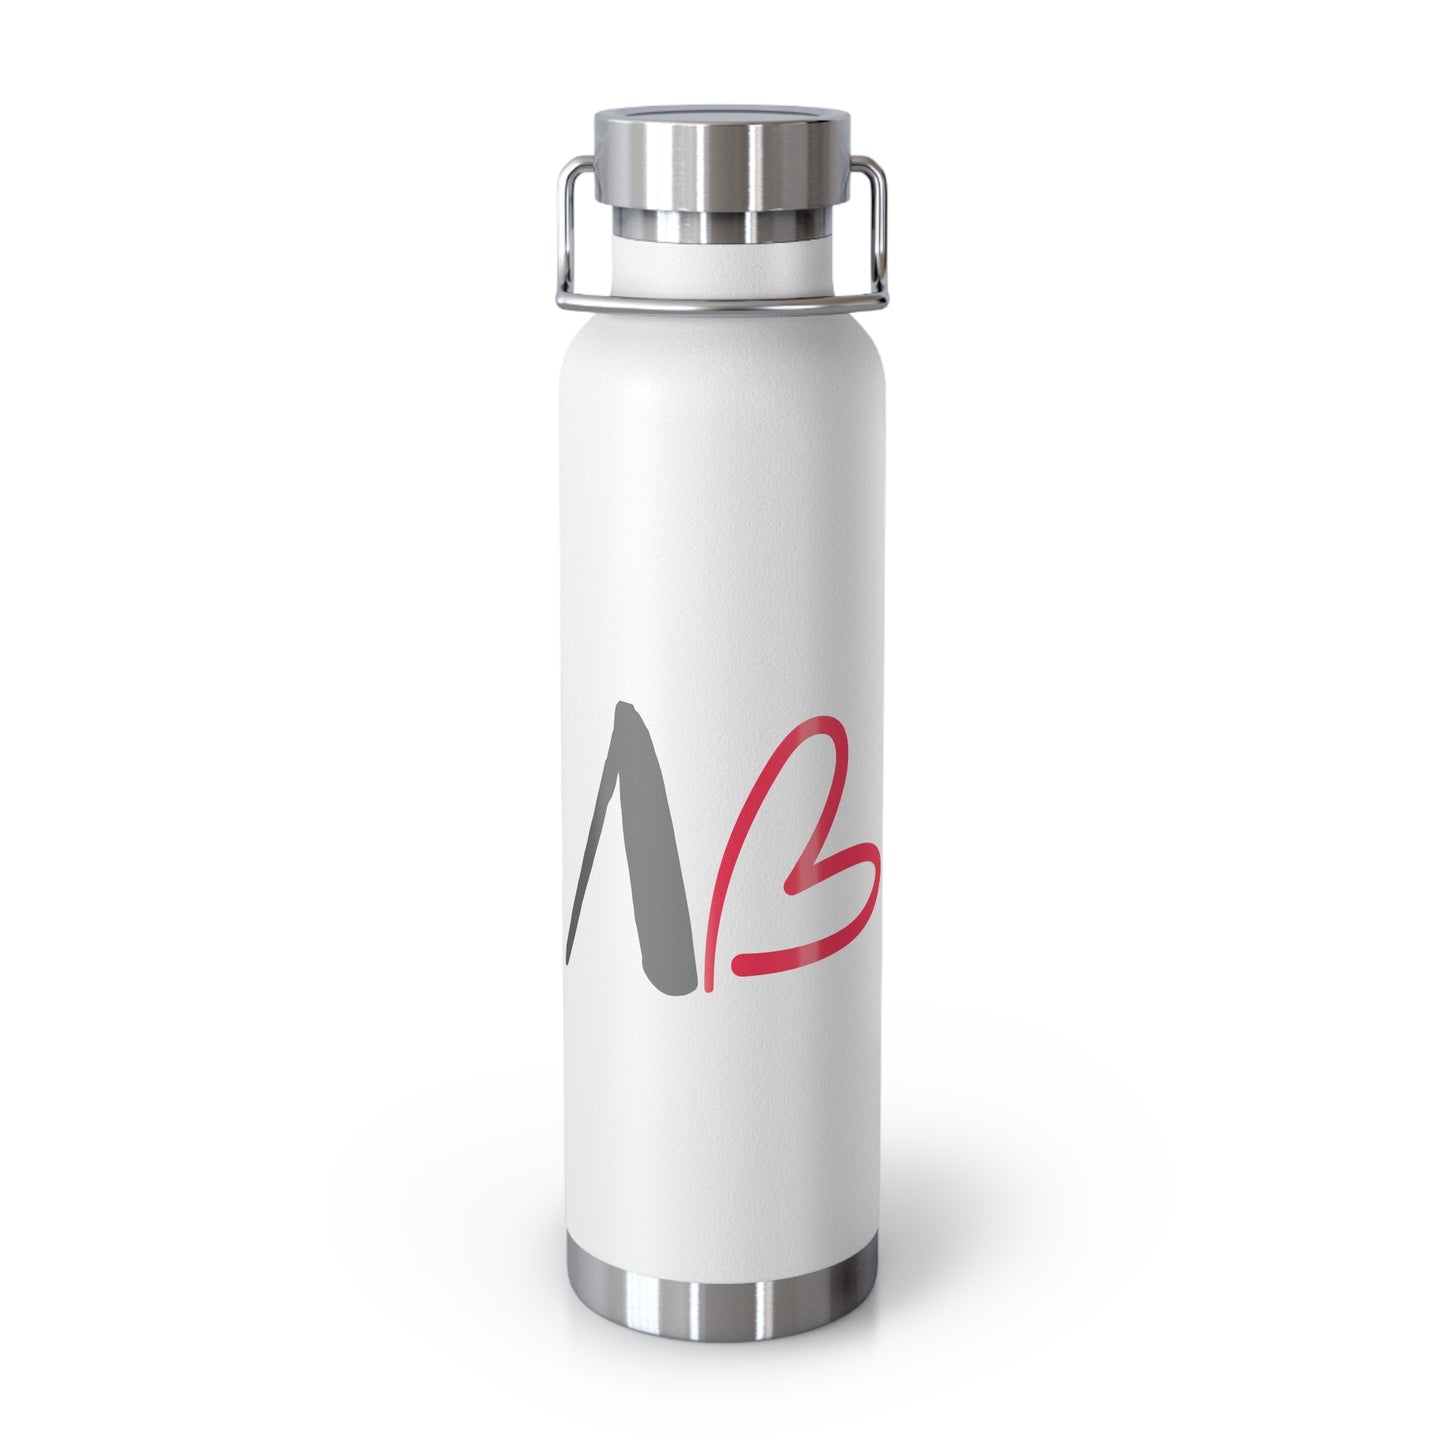 Automatic Body Copper Vacuum Insulated Bottle, 22oz